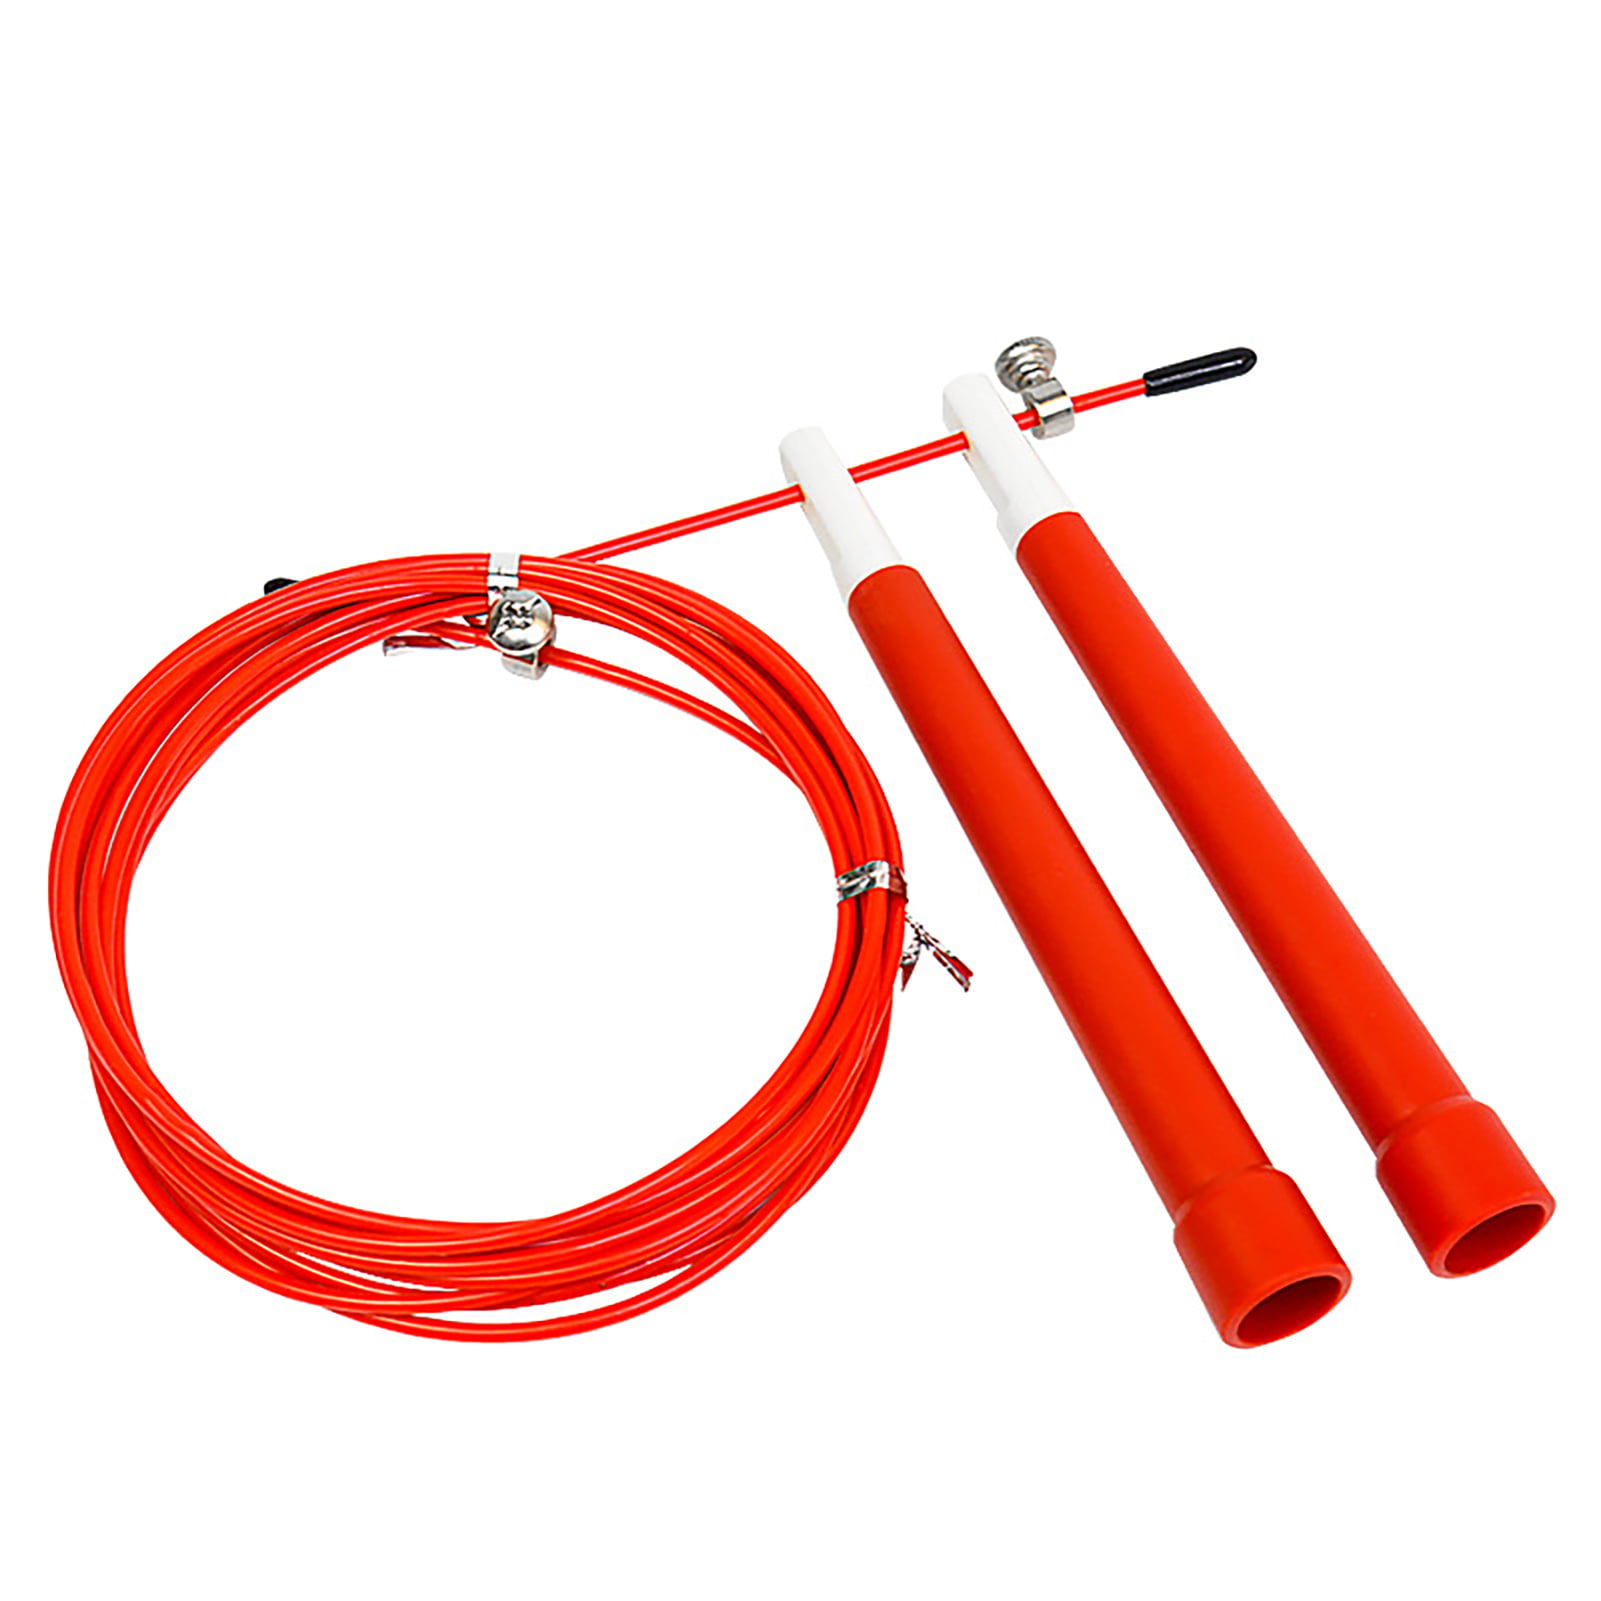 Details about   Jump Rope Rapid Speed with Ball Bearing Steel Cable Tangle-Free Skipping Rope 